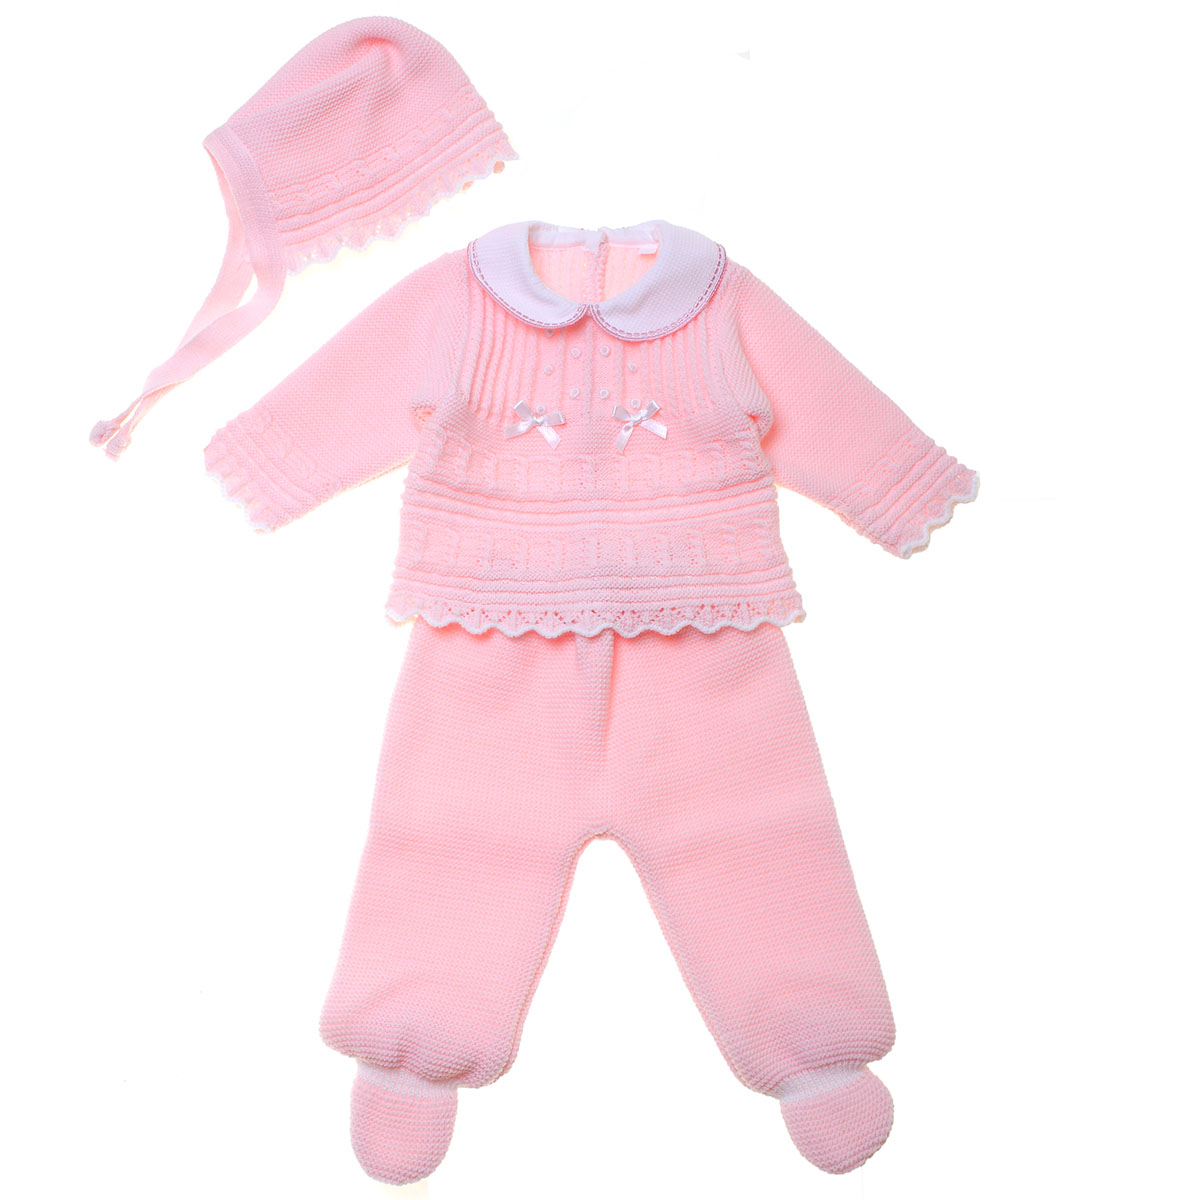 Baby Girls Spanish Romany Style 2 Piece Knitted Outfit Set UK 